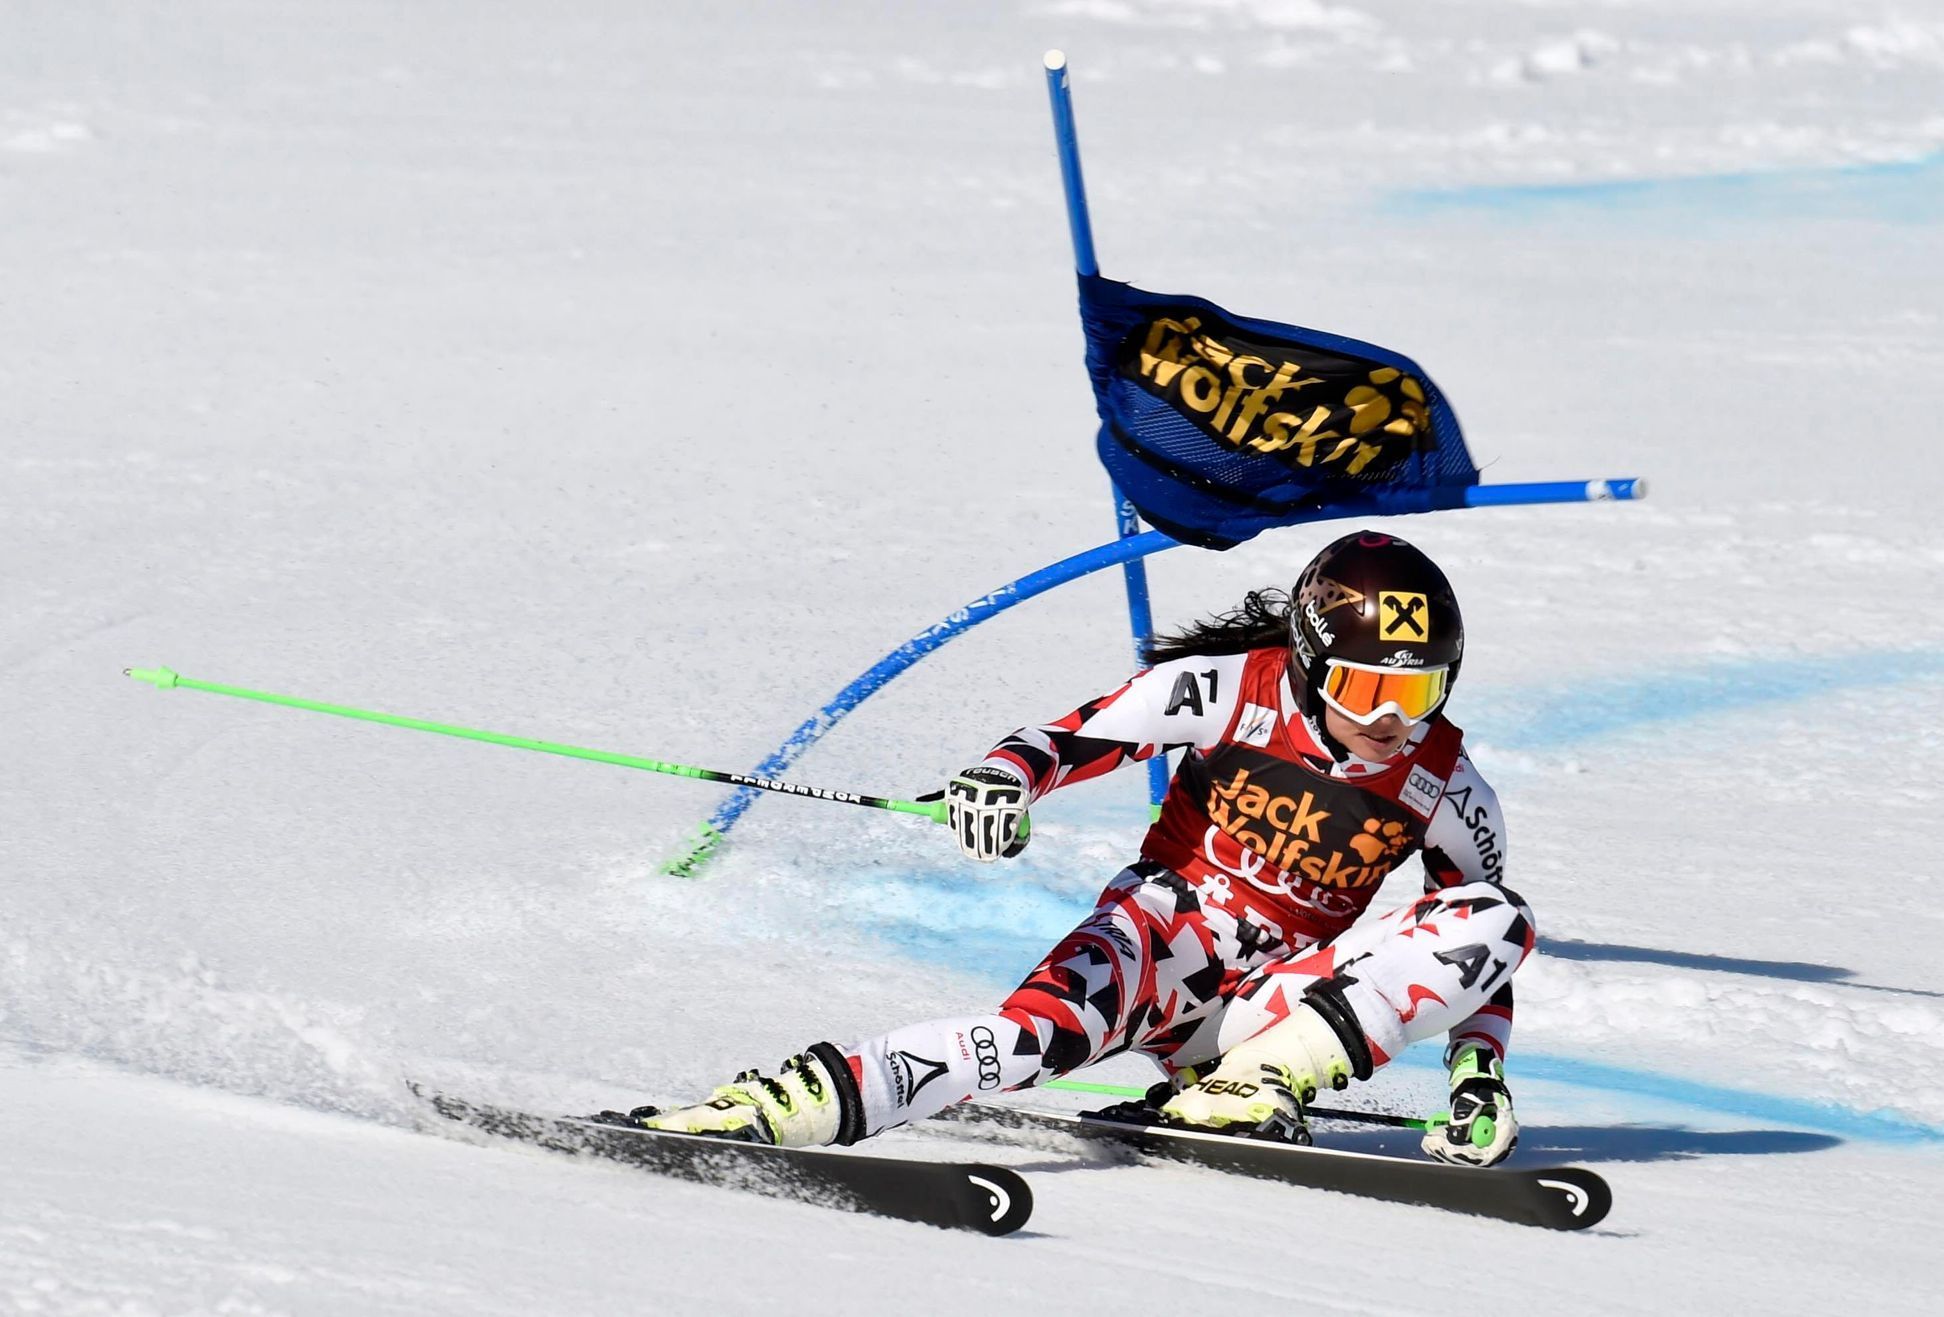 Anna Fenninger of Austria skis during the first run of women's giant slalom event at the Alpine Skiing World Cup in Are